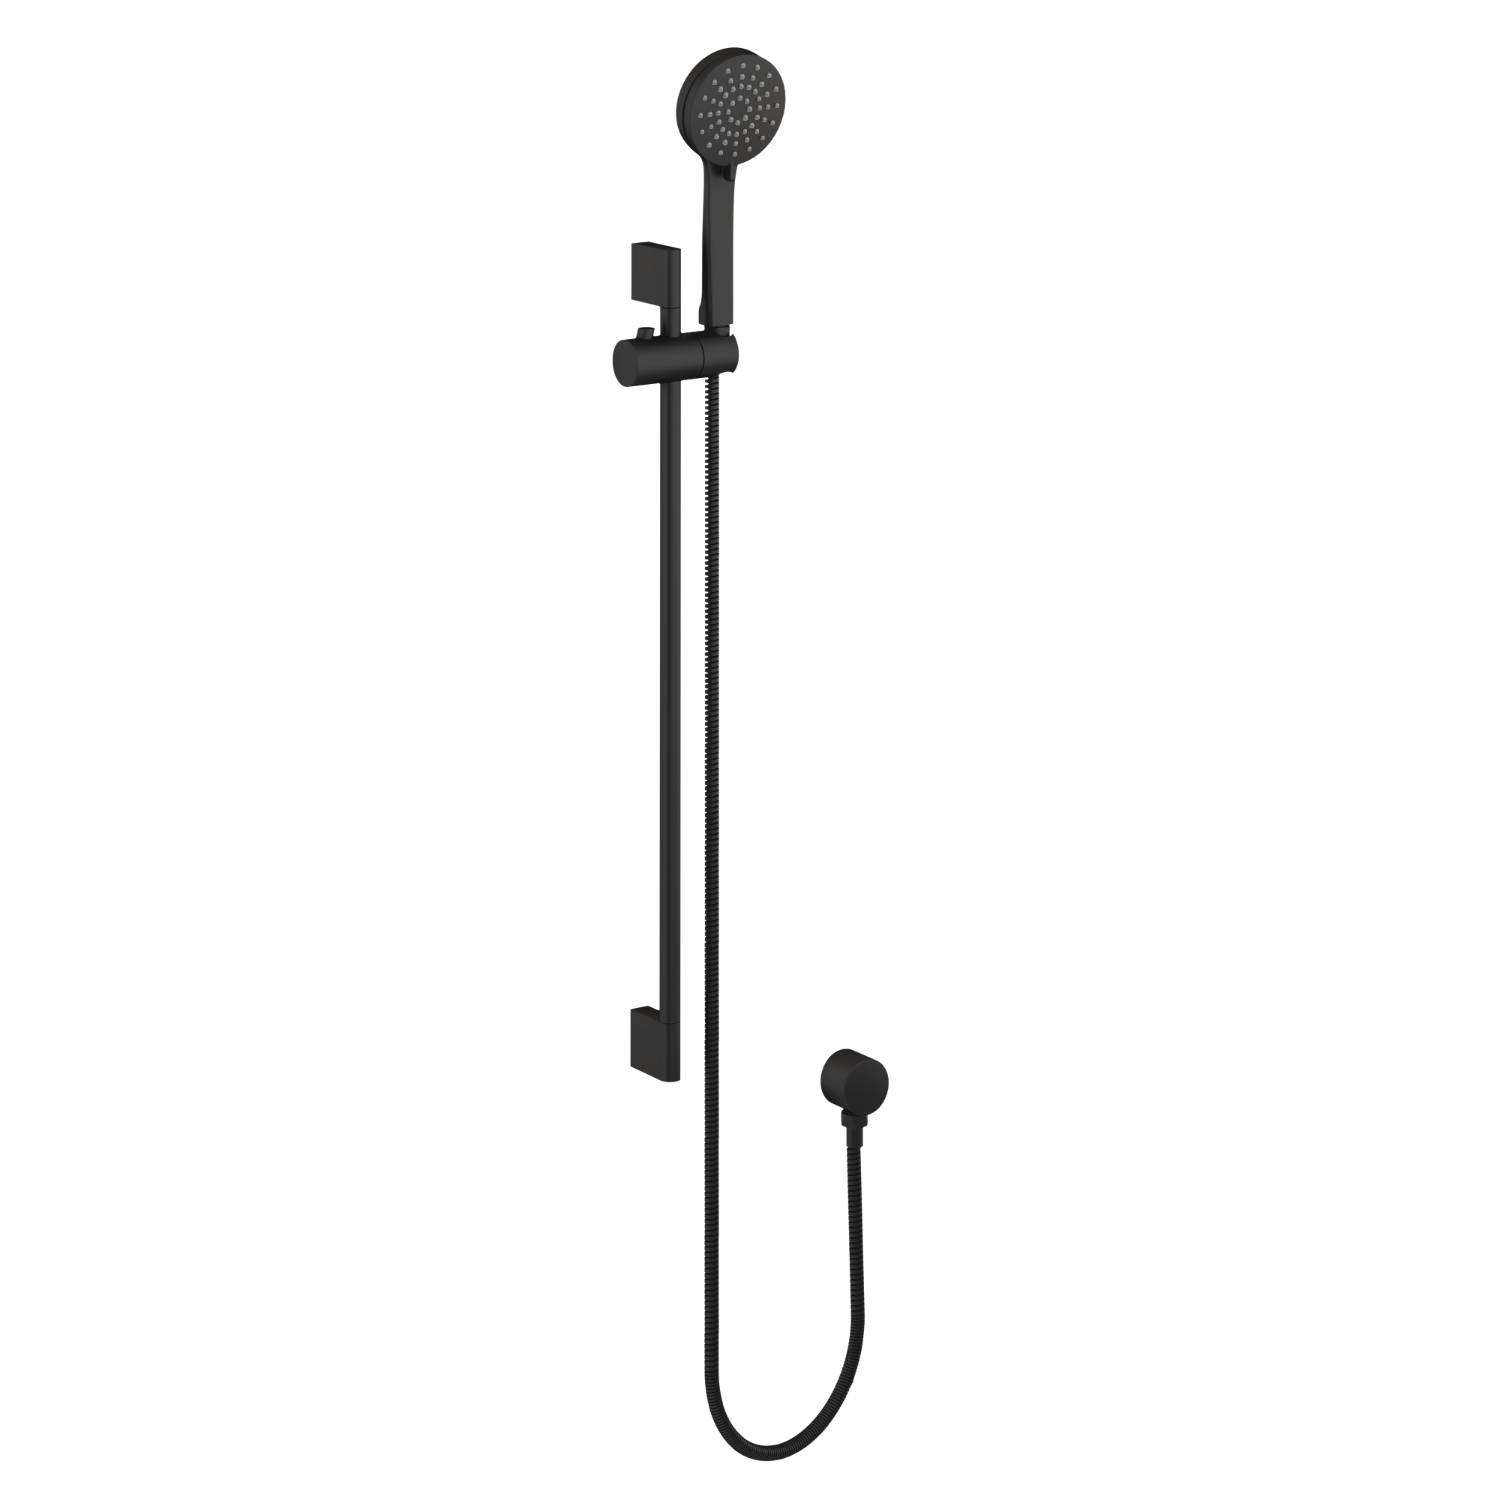 Hoxton Shower Set with Outlet Elbow